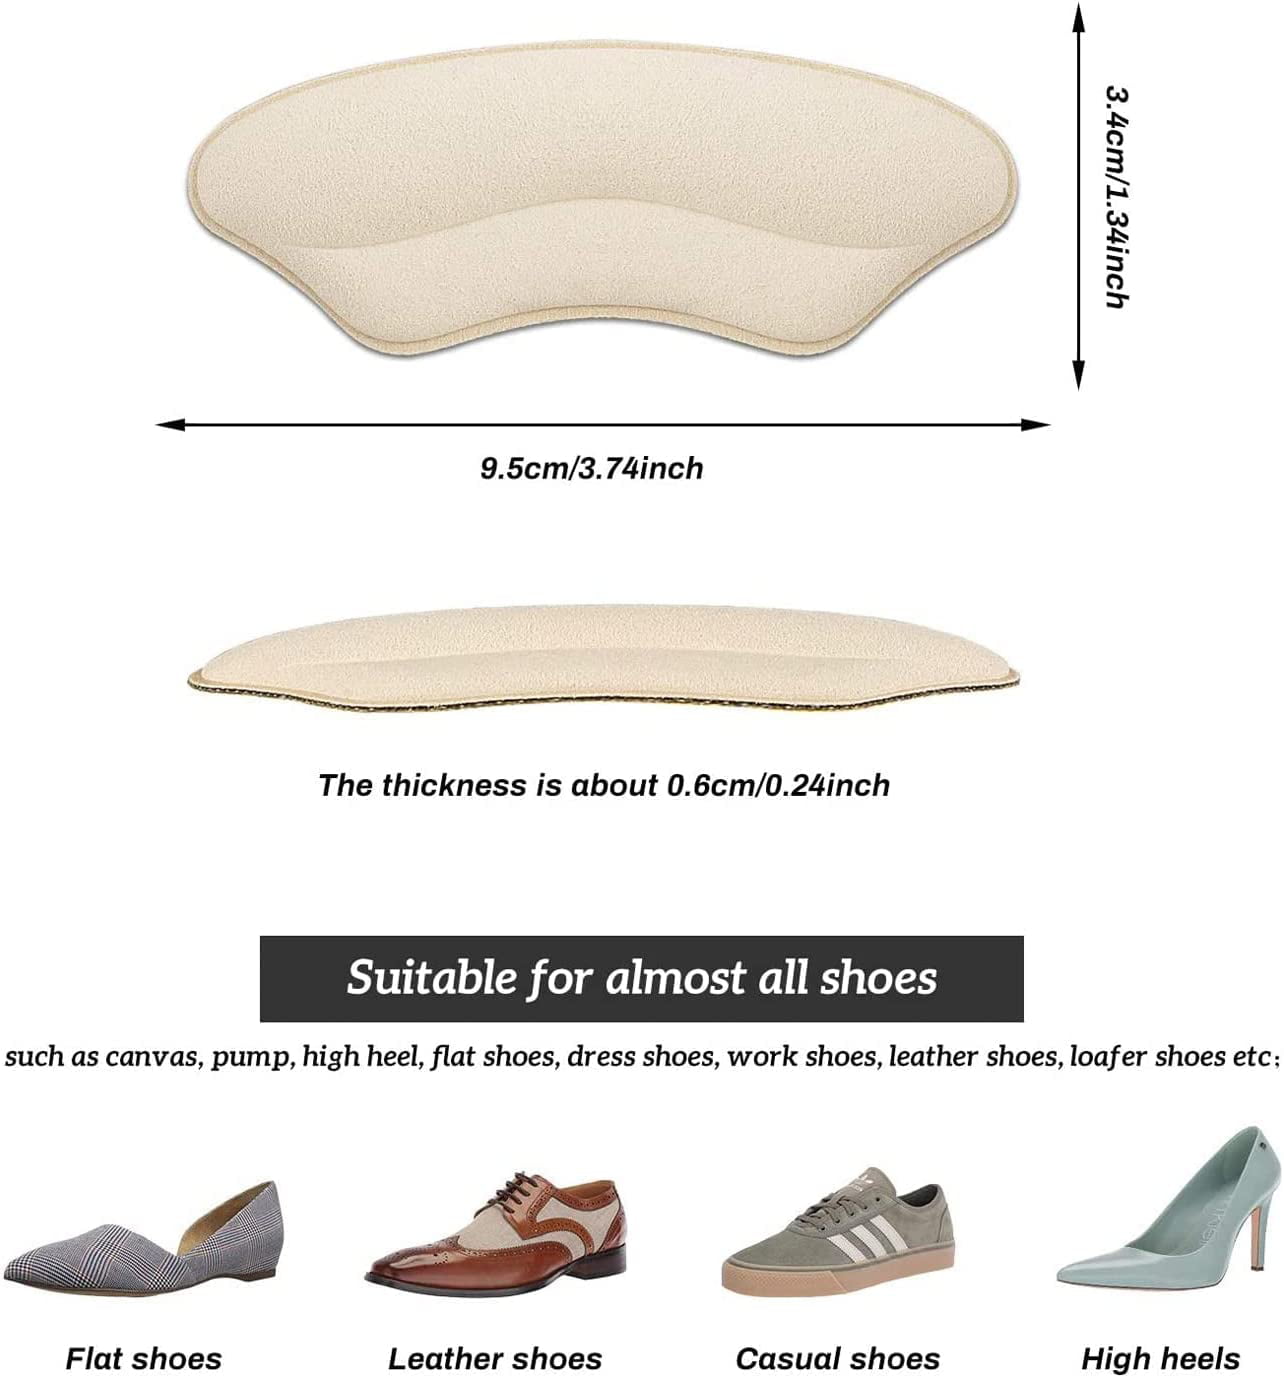 PEDIMEND™ Leather Heel Pads Grip Cushion Liners Inserts for Shoes Too Big  (2PCS) | eBay